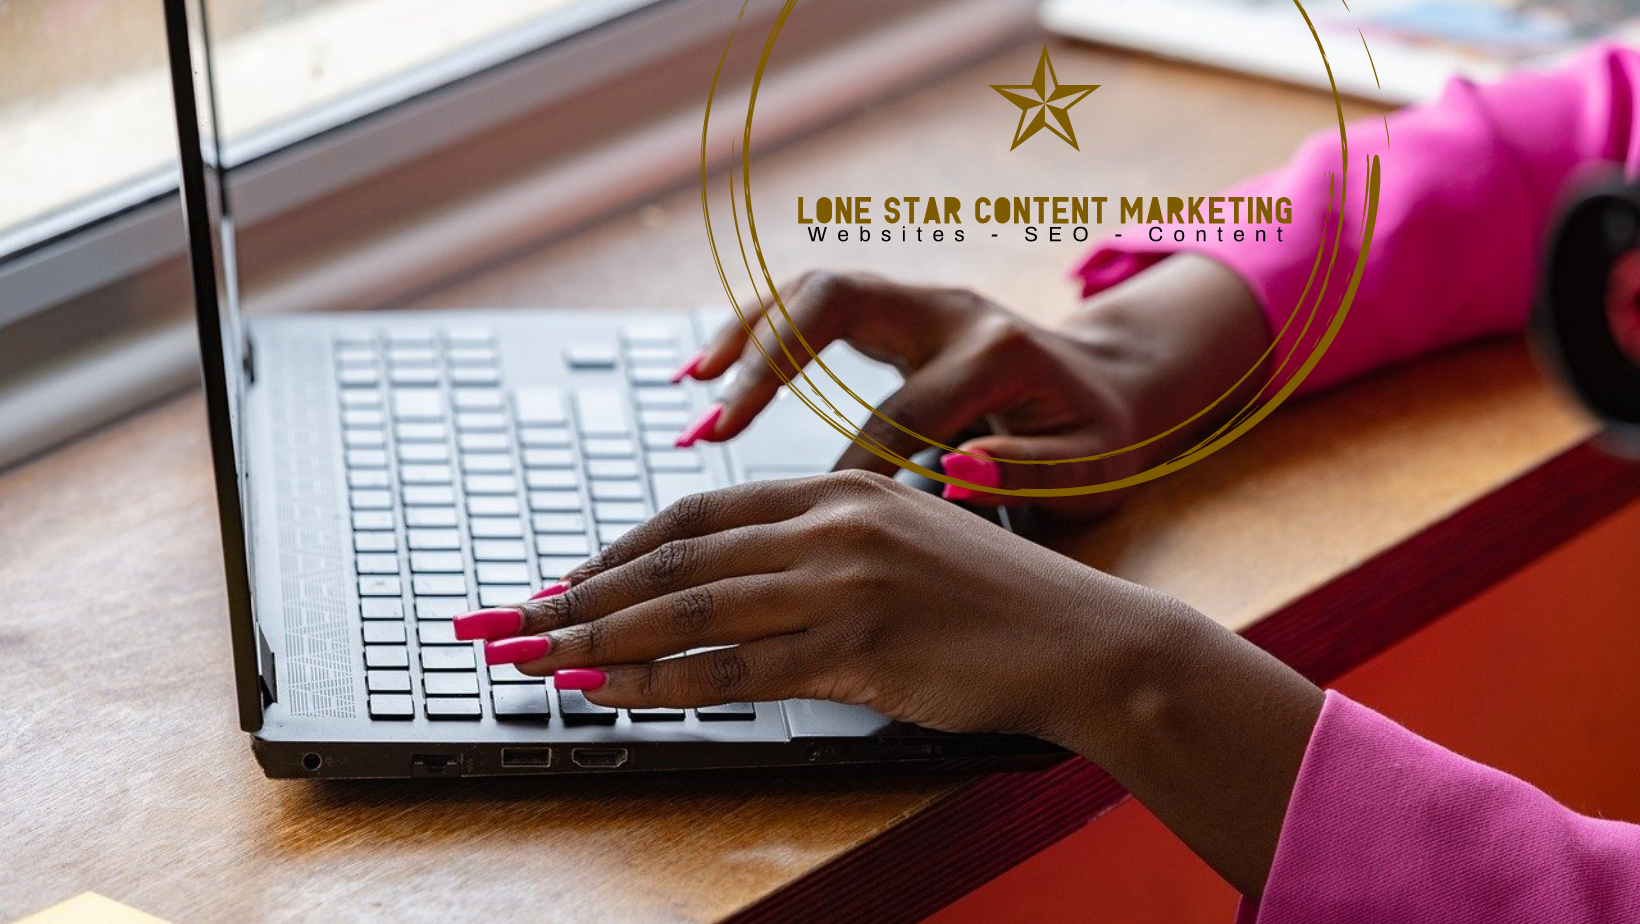 We Love Creating Engaging Social Media Content for You at Lone Star Content Marketing